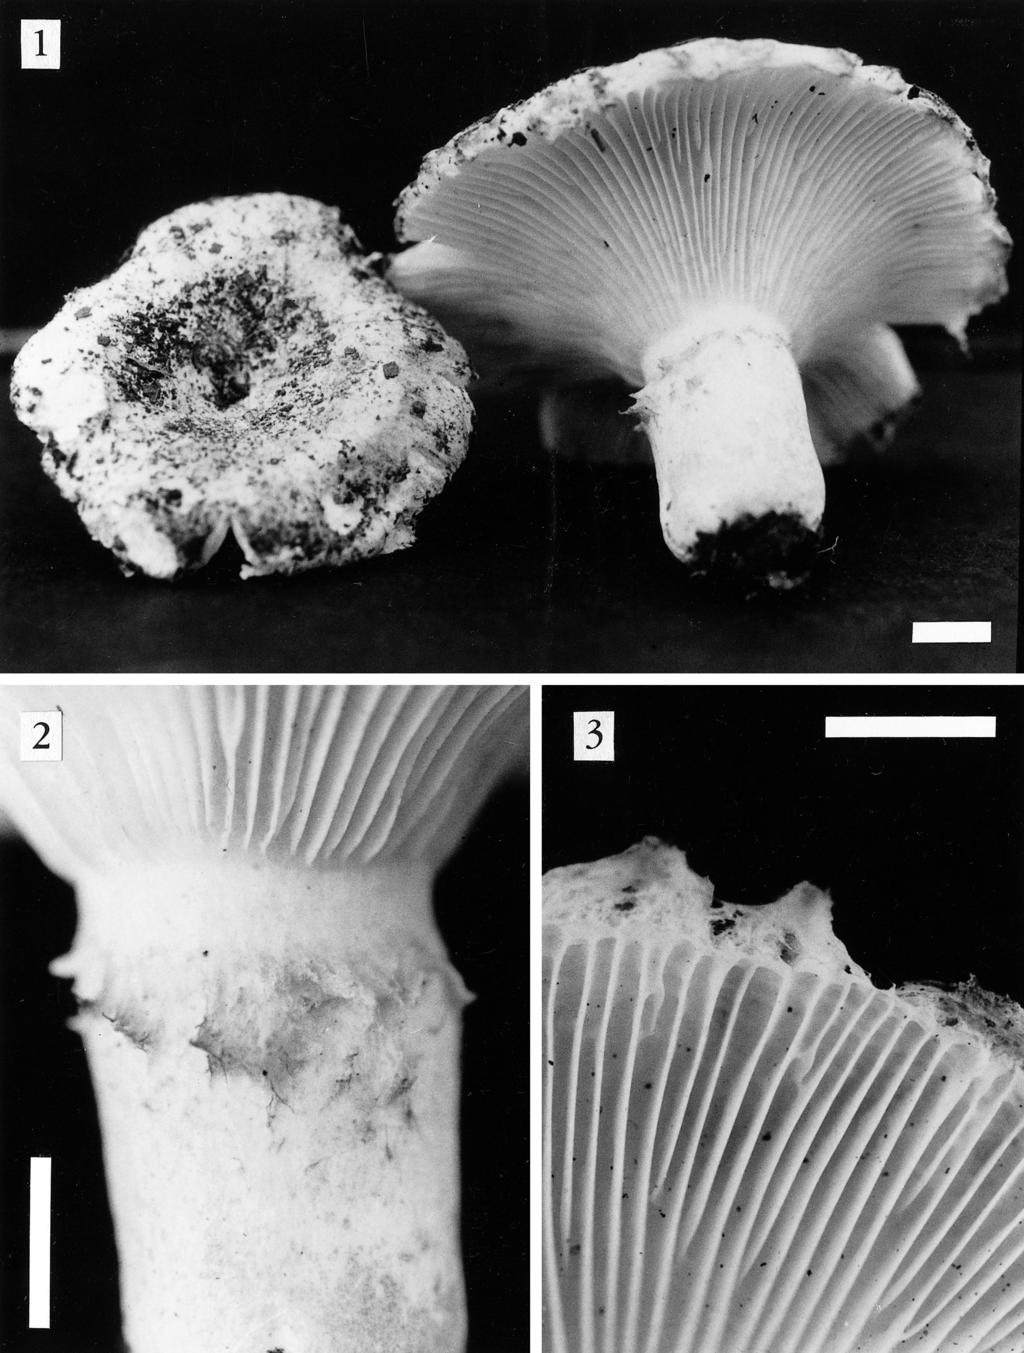 292 MYCOLOGIA FIGS. 1 3. Russula herrerae. 1. Basidiomes. 2. Stipe with remnants of the marginal veil. 3. Pileus margin showing the marginal veil. Scale bars 1 cm. All from A. Kong 2622, HOLOTY PE.